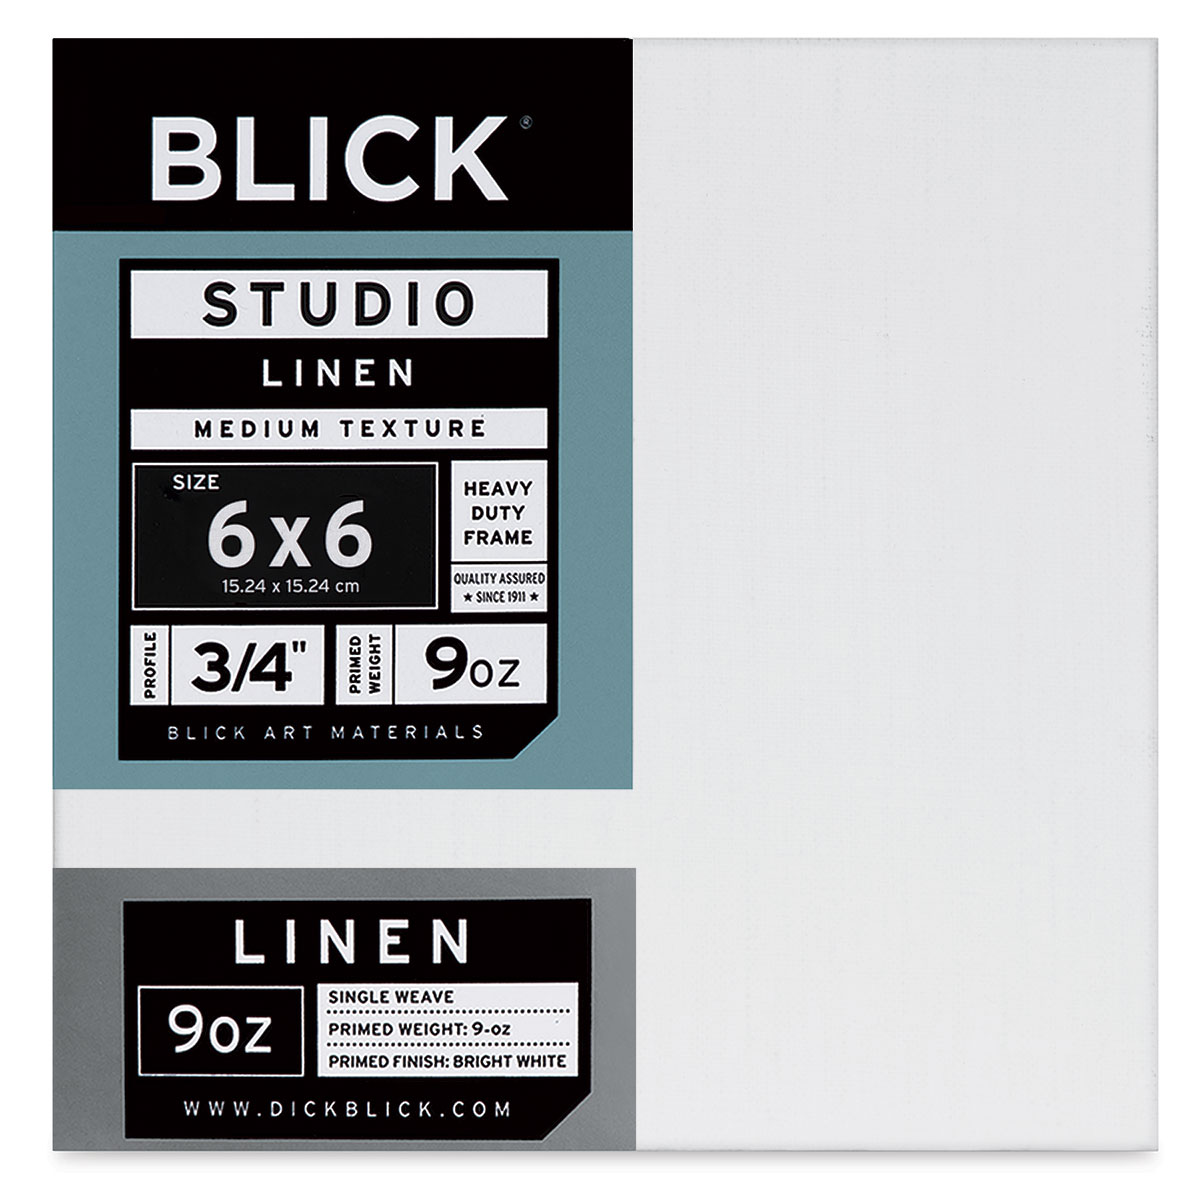 Blick Studio Linen Stretched Canvas - 18 x 24, Traditional 3/4 Profile